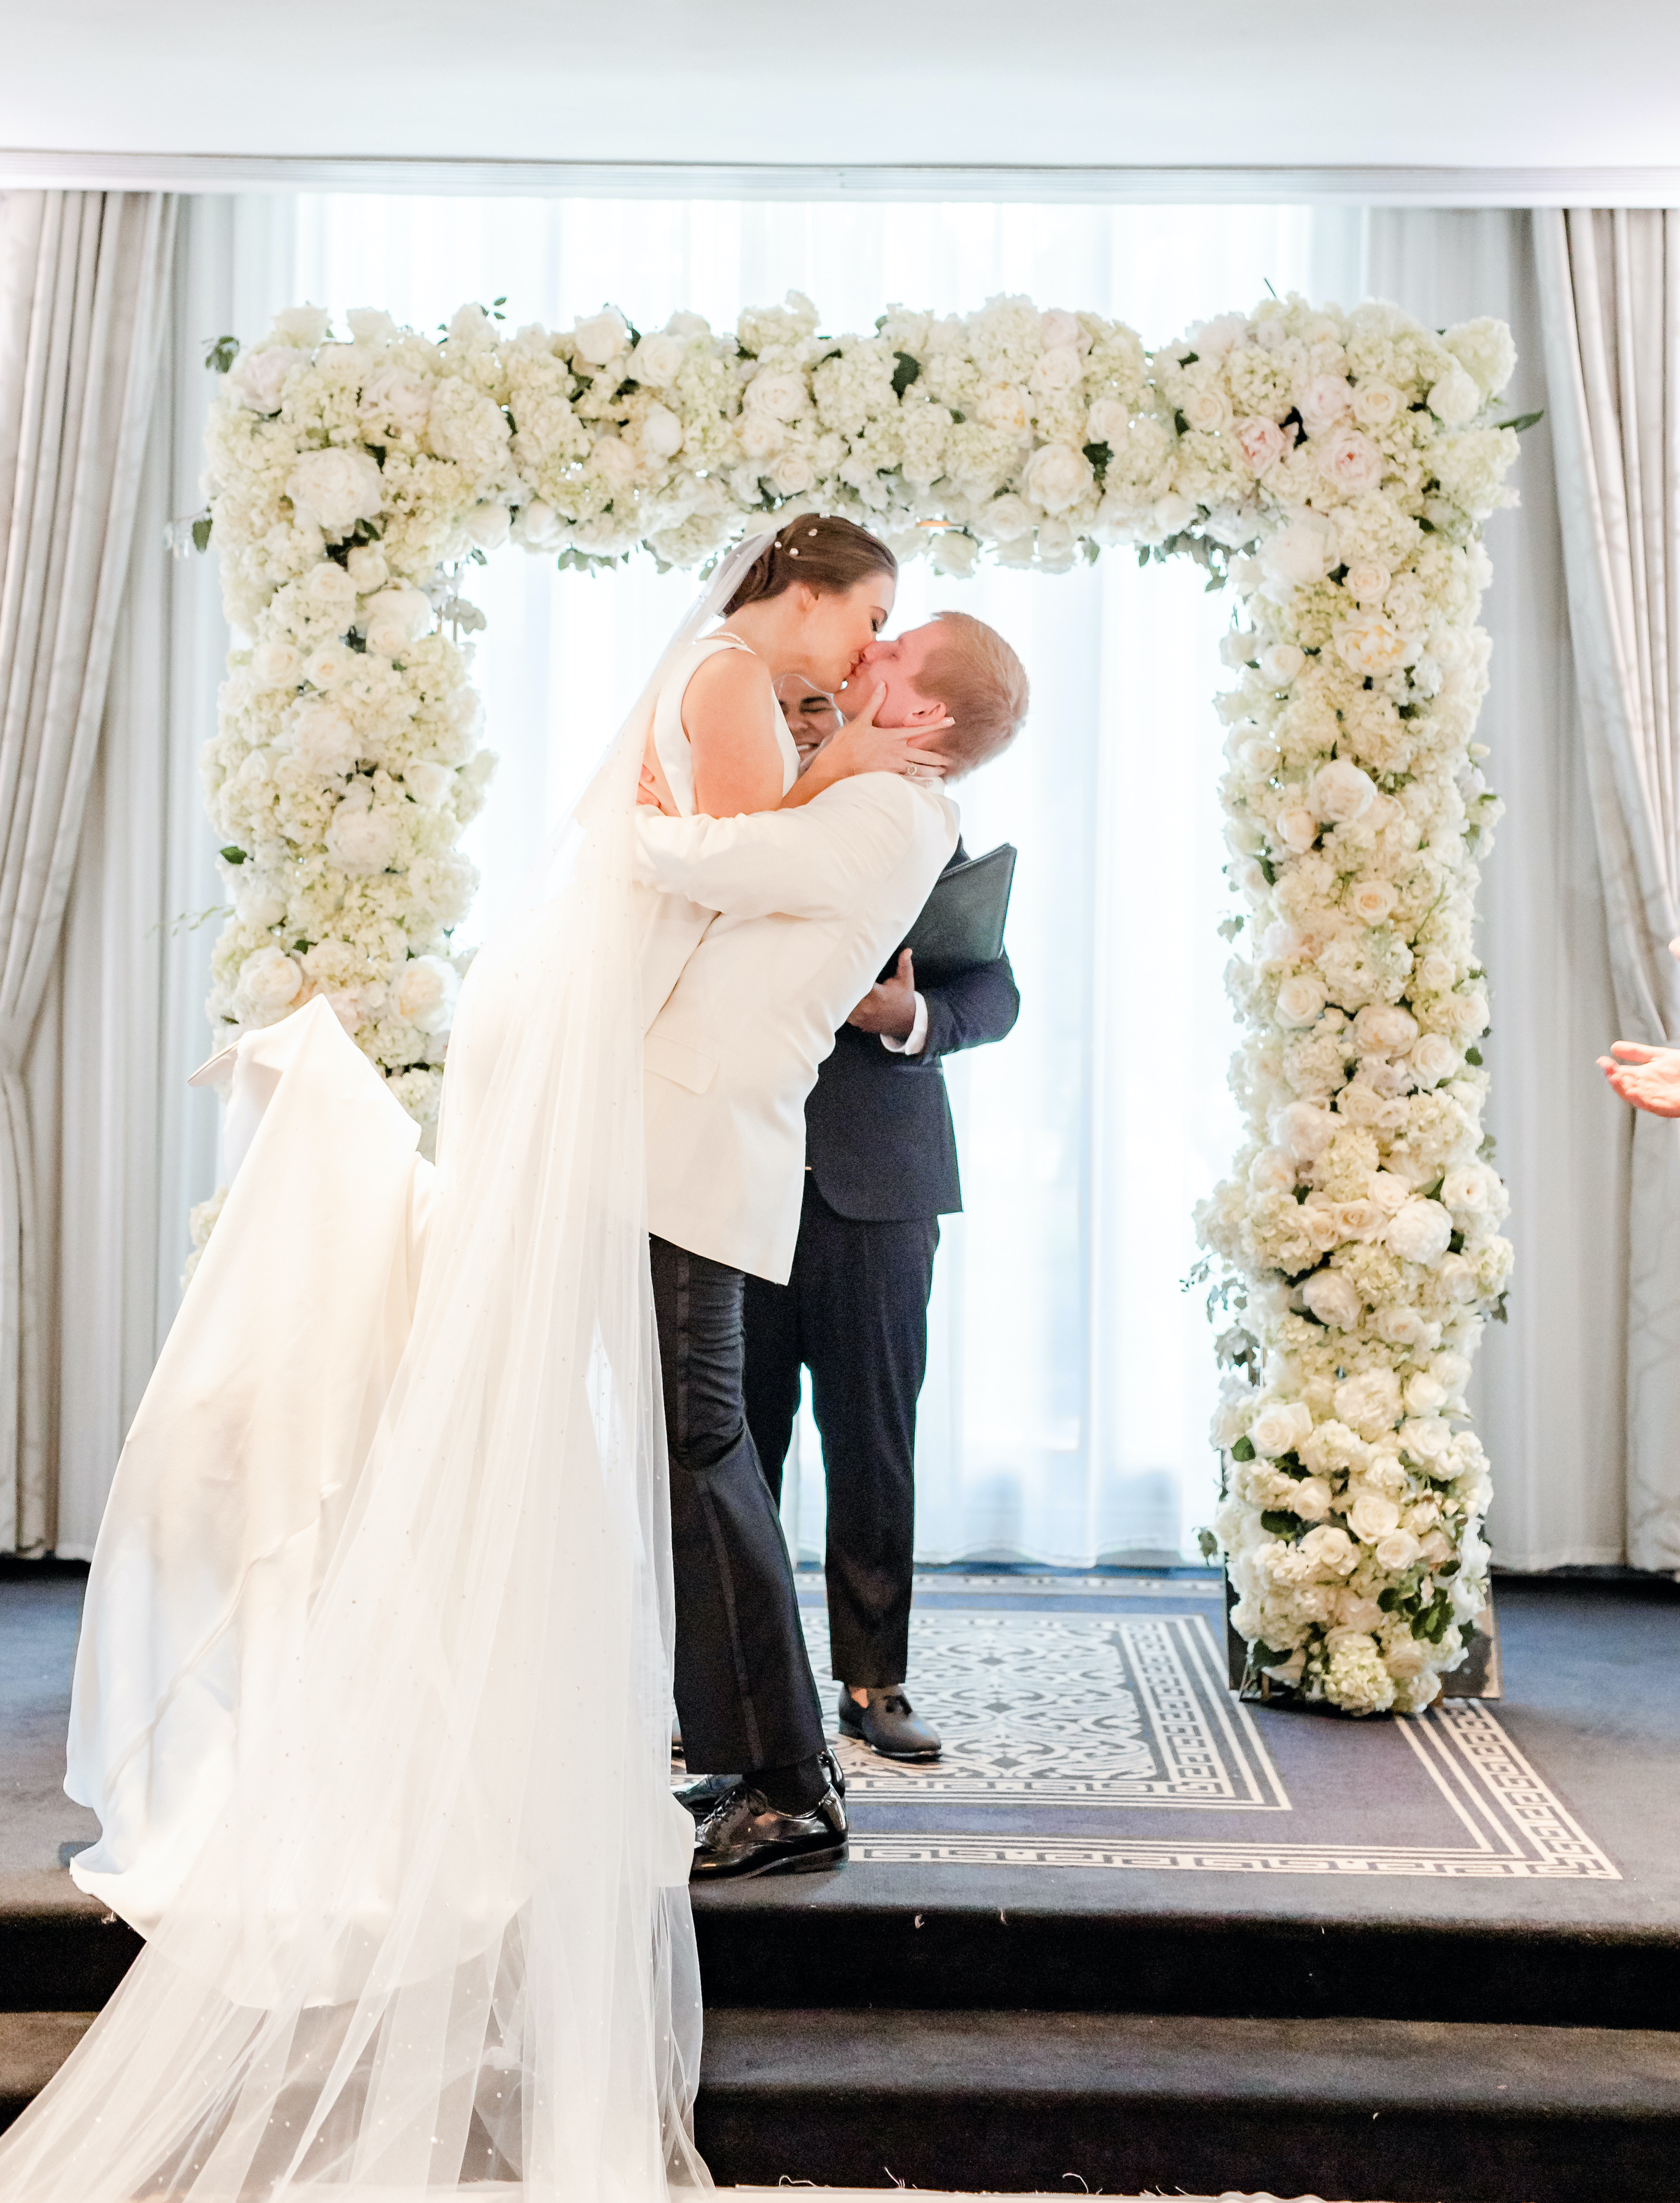 The groom lifts his bride in the air at the altar why they are kissing at their wedding ceremony in the Houston museum district.